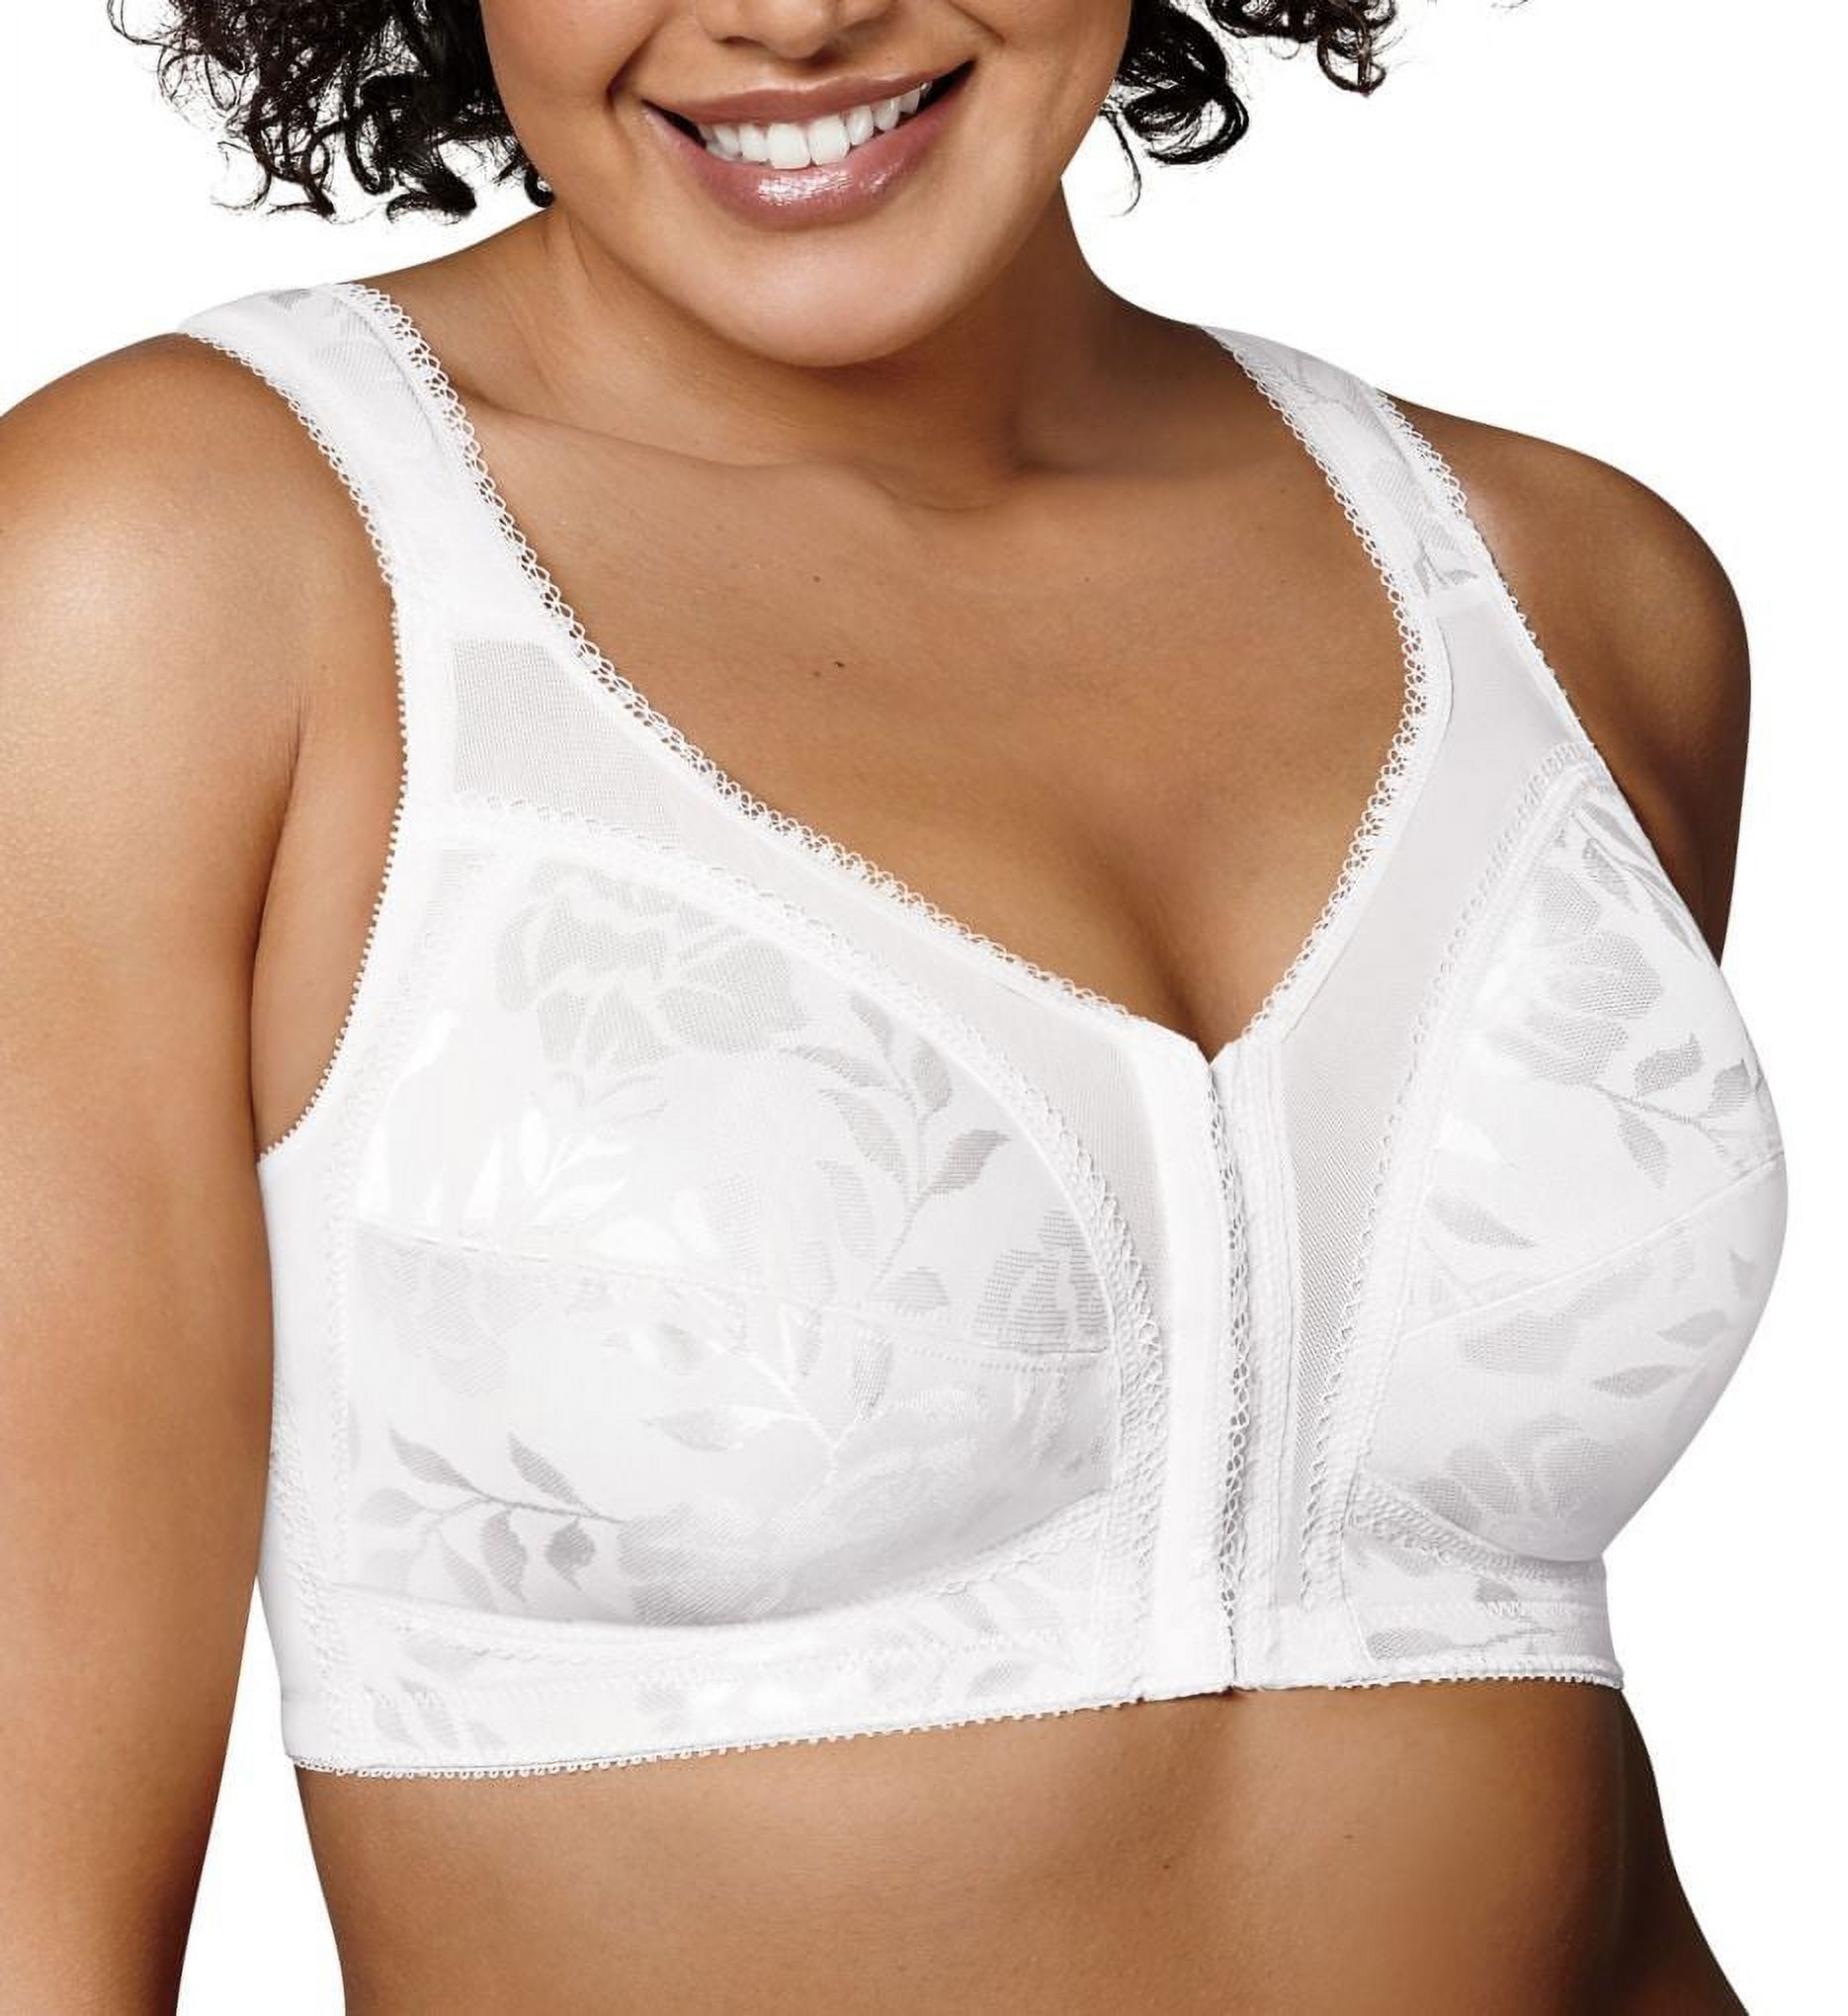 Playtex 18 Hour Supportive Flexible Back Front-Close Wireless Bra White 36D Women's - image 1 of 8